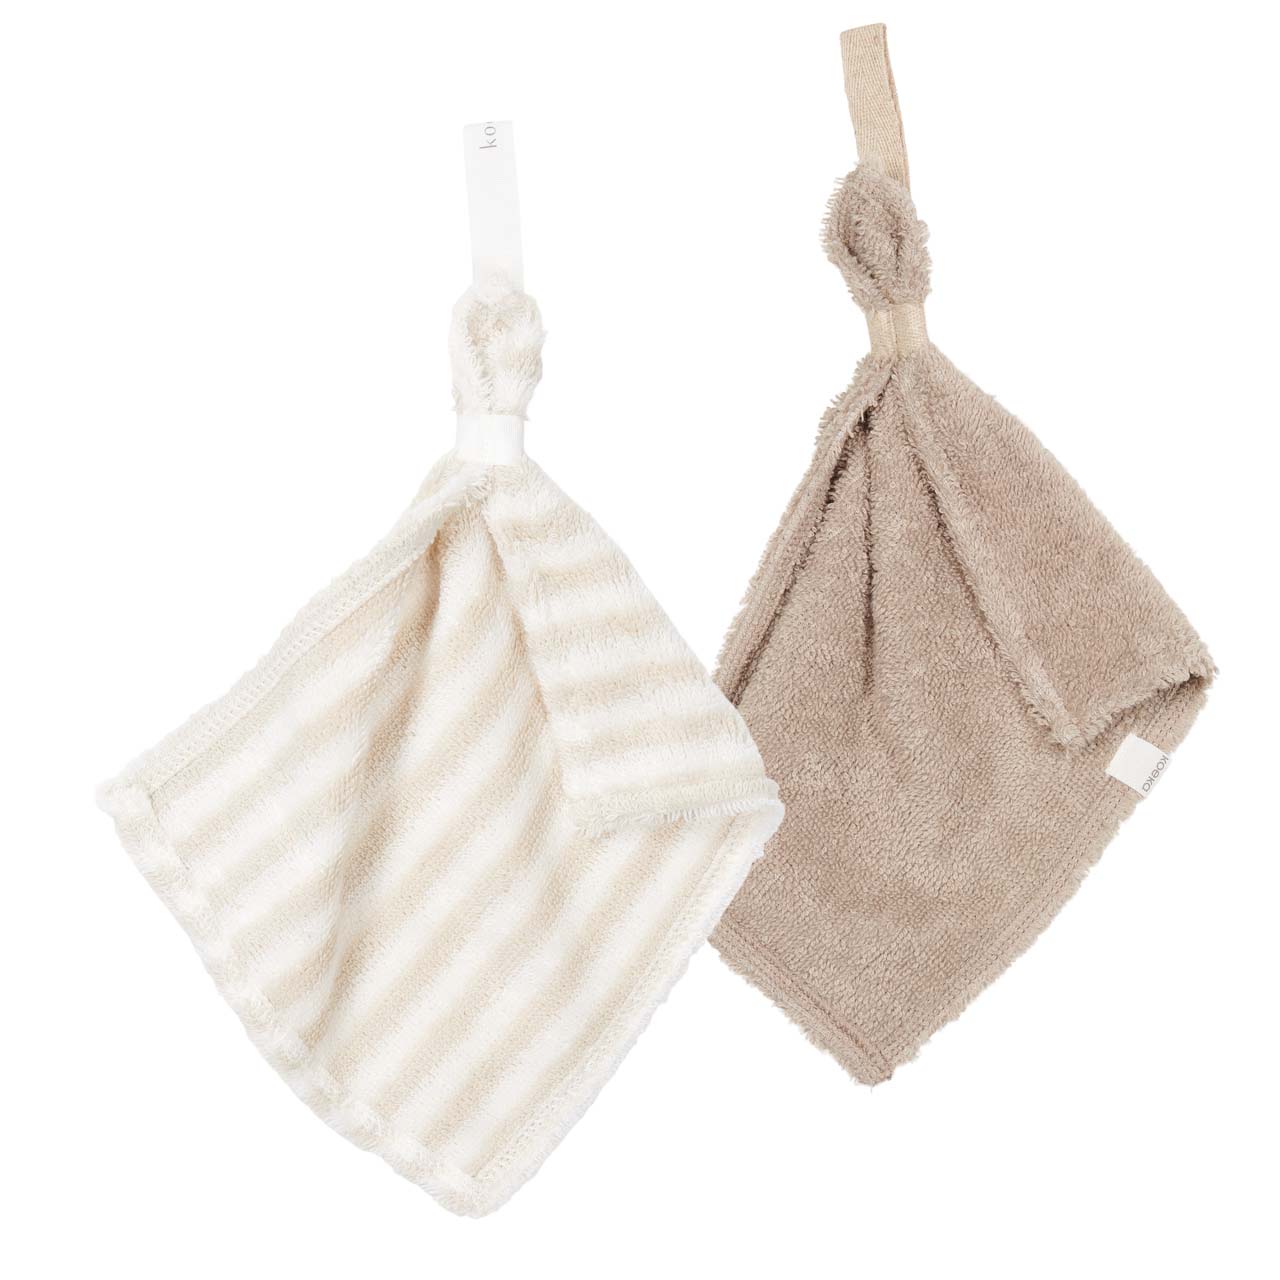 Pacifier cloth 2-pack Playa sand/clay